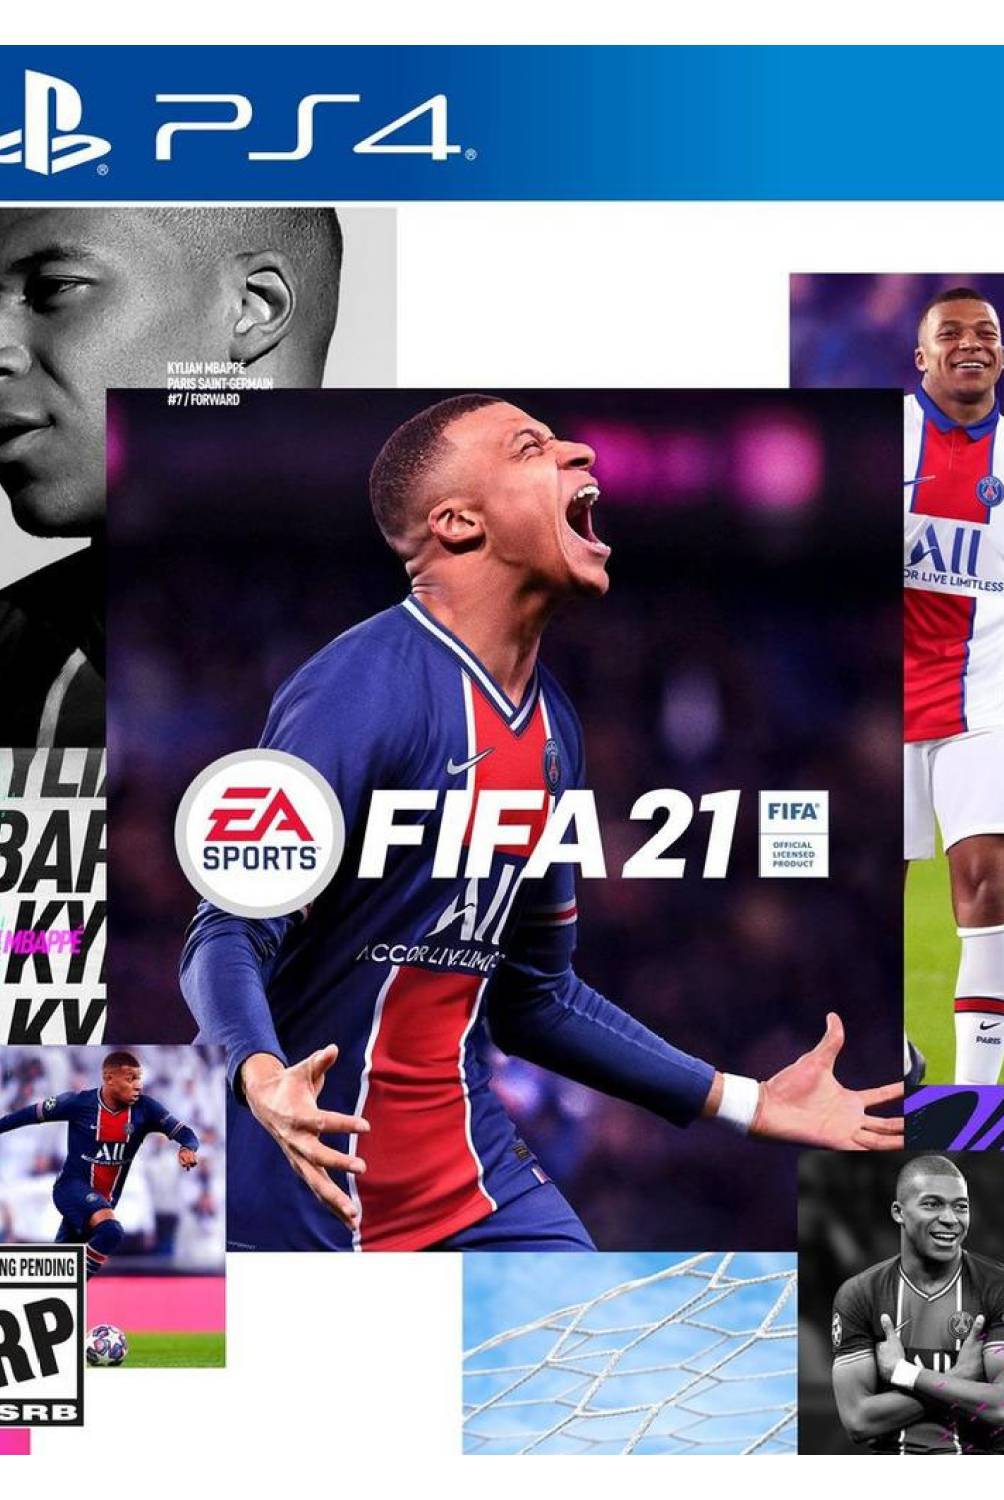 ELECTRONIC ARTS - Fifa 21  PS4  Standard - PS4